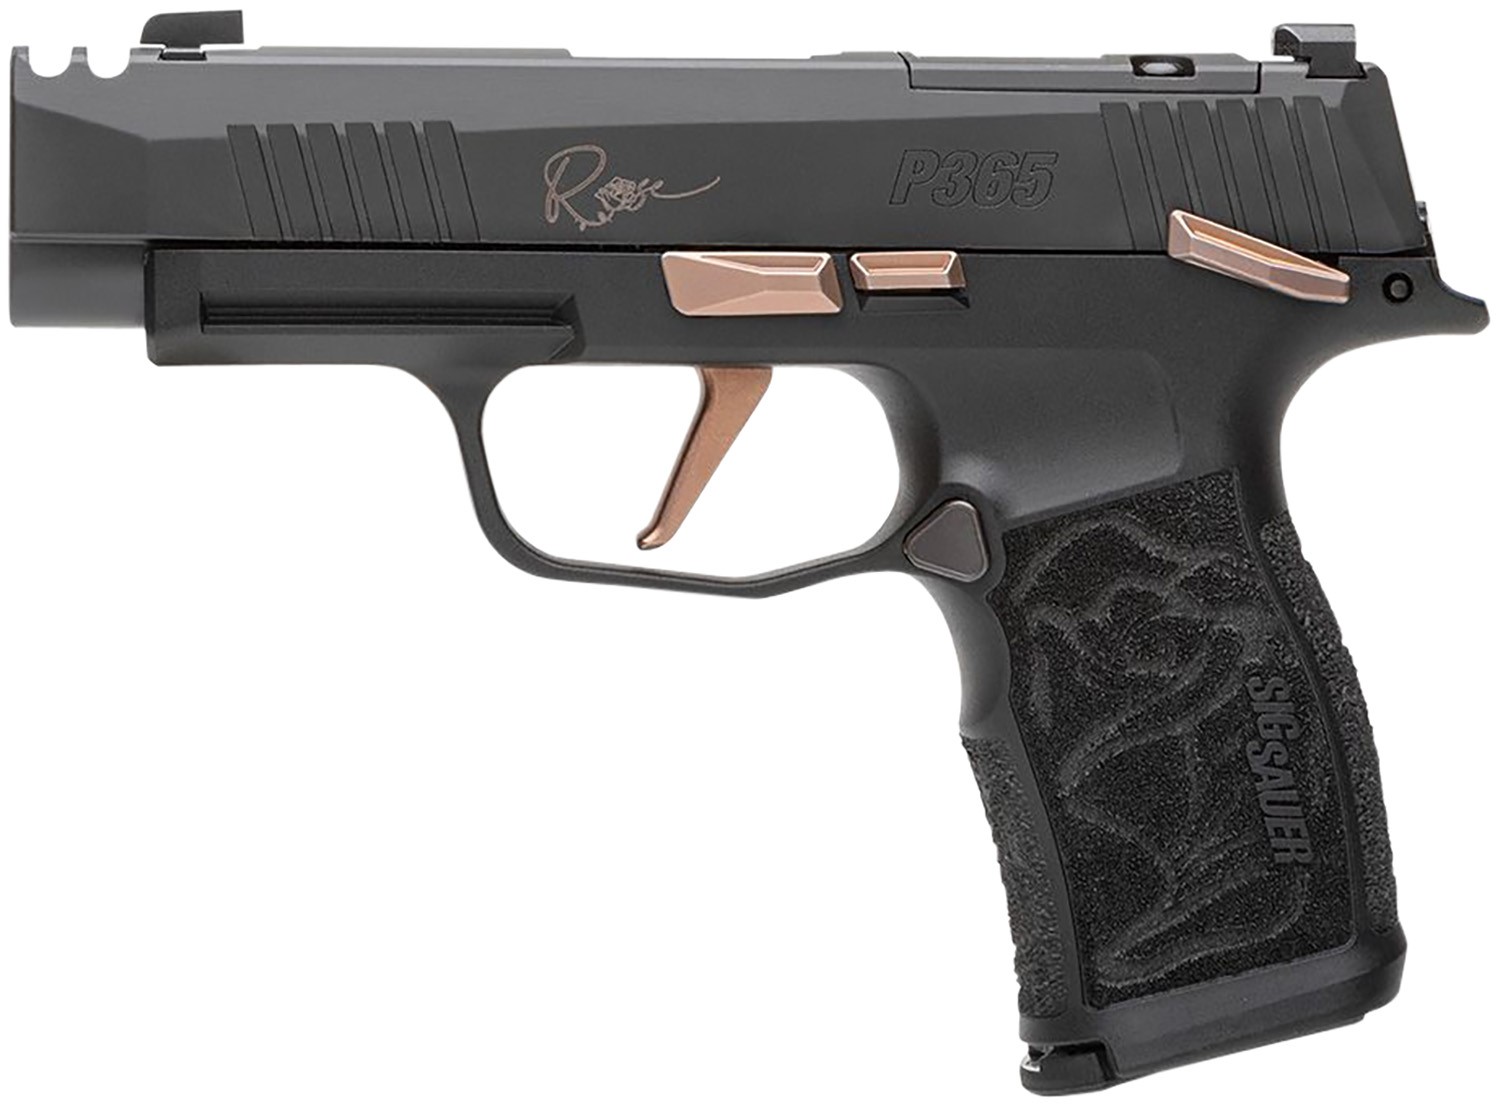 SIG SAUER P365XL, 9MM 3.1" OPTICS READY, ROSE ENGRAVING AND ACCENTS, 12RDS PKG